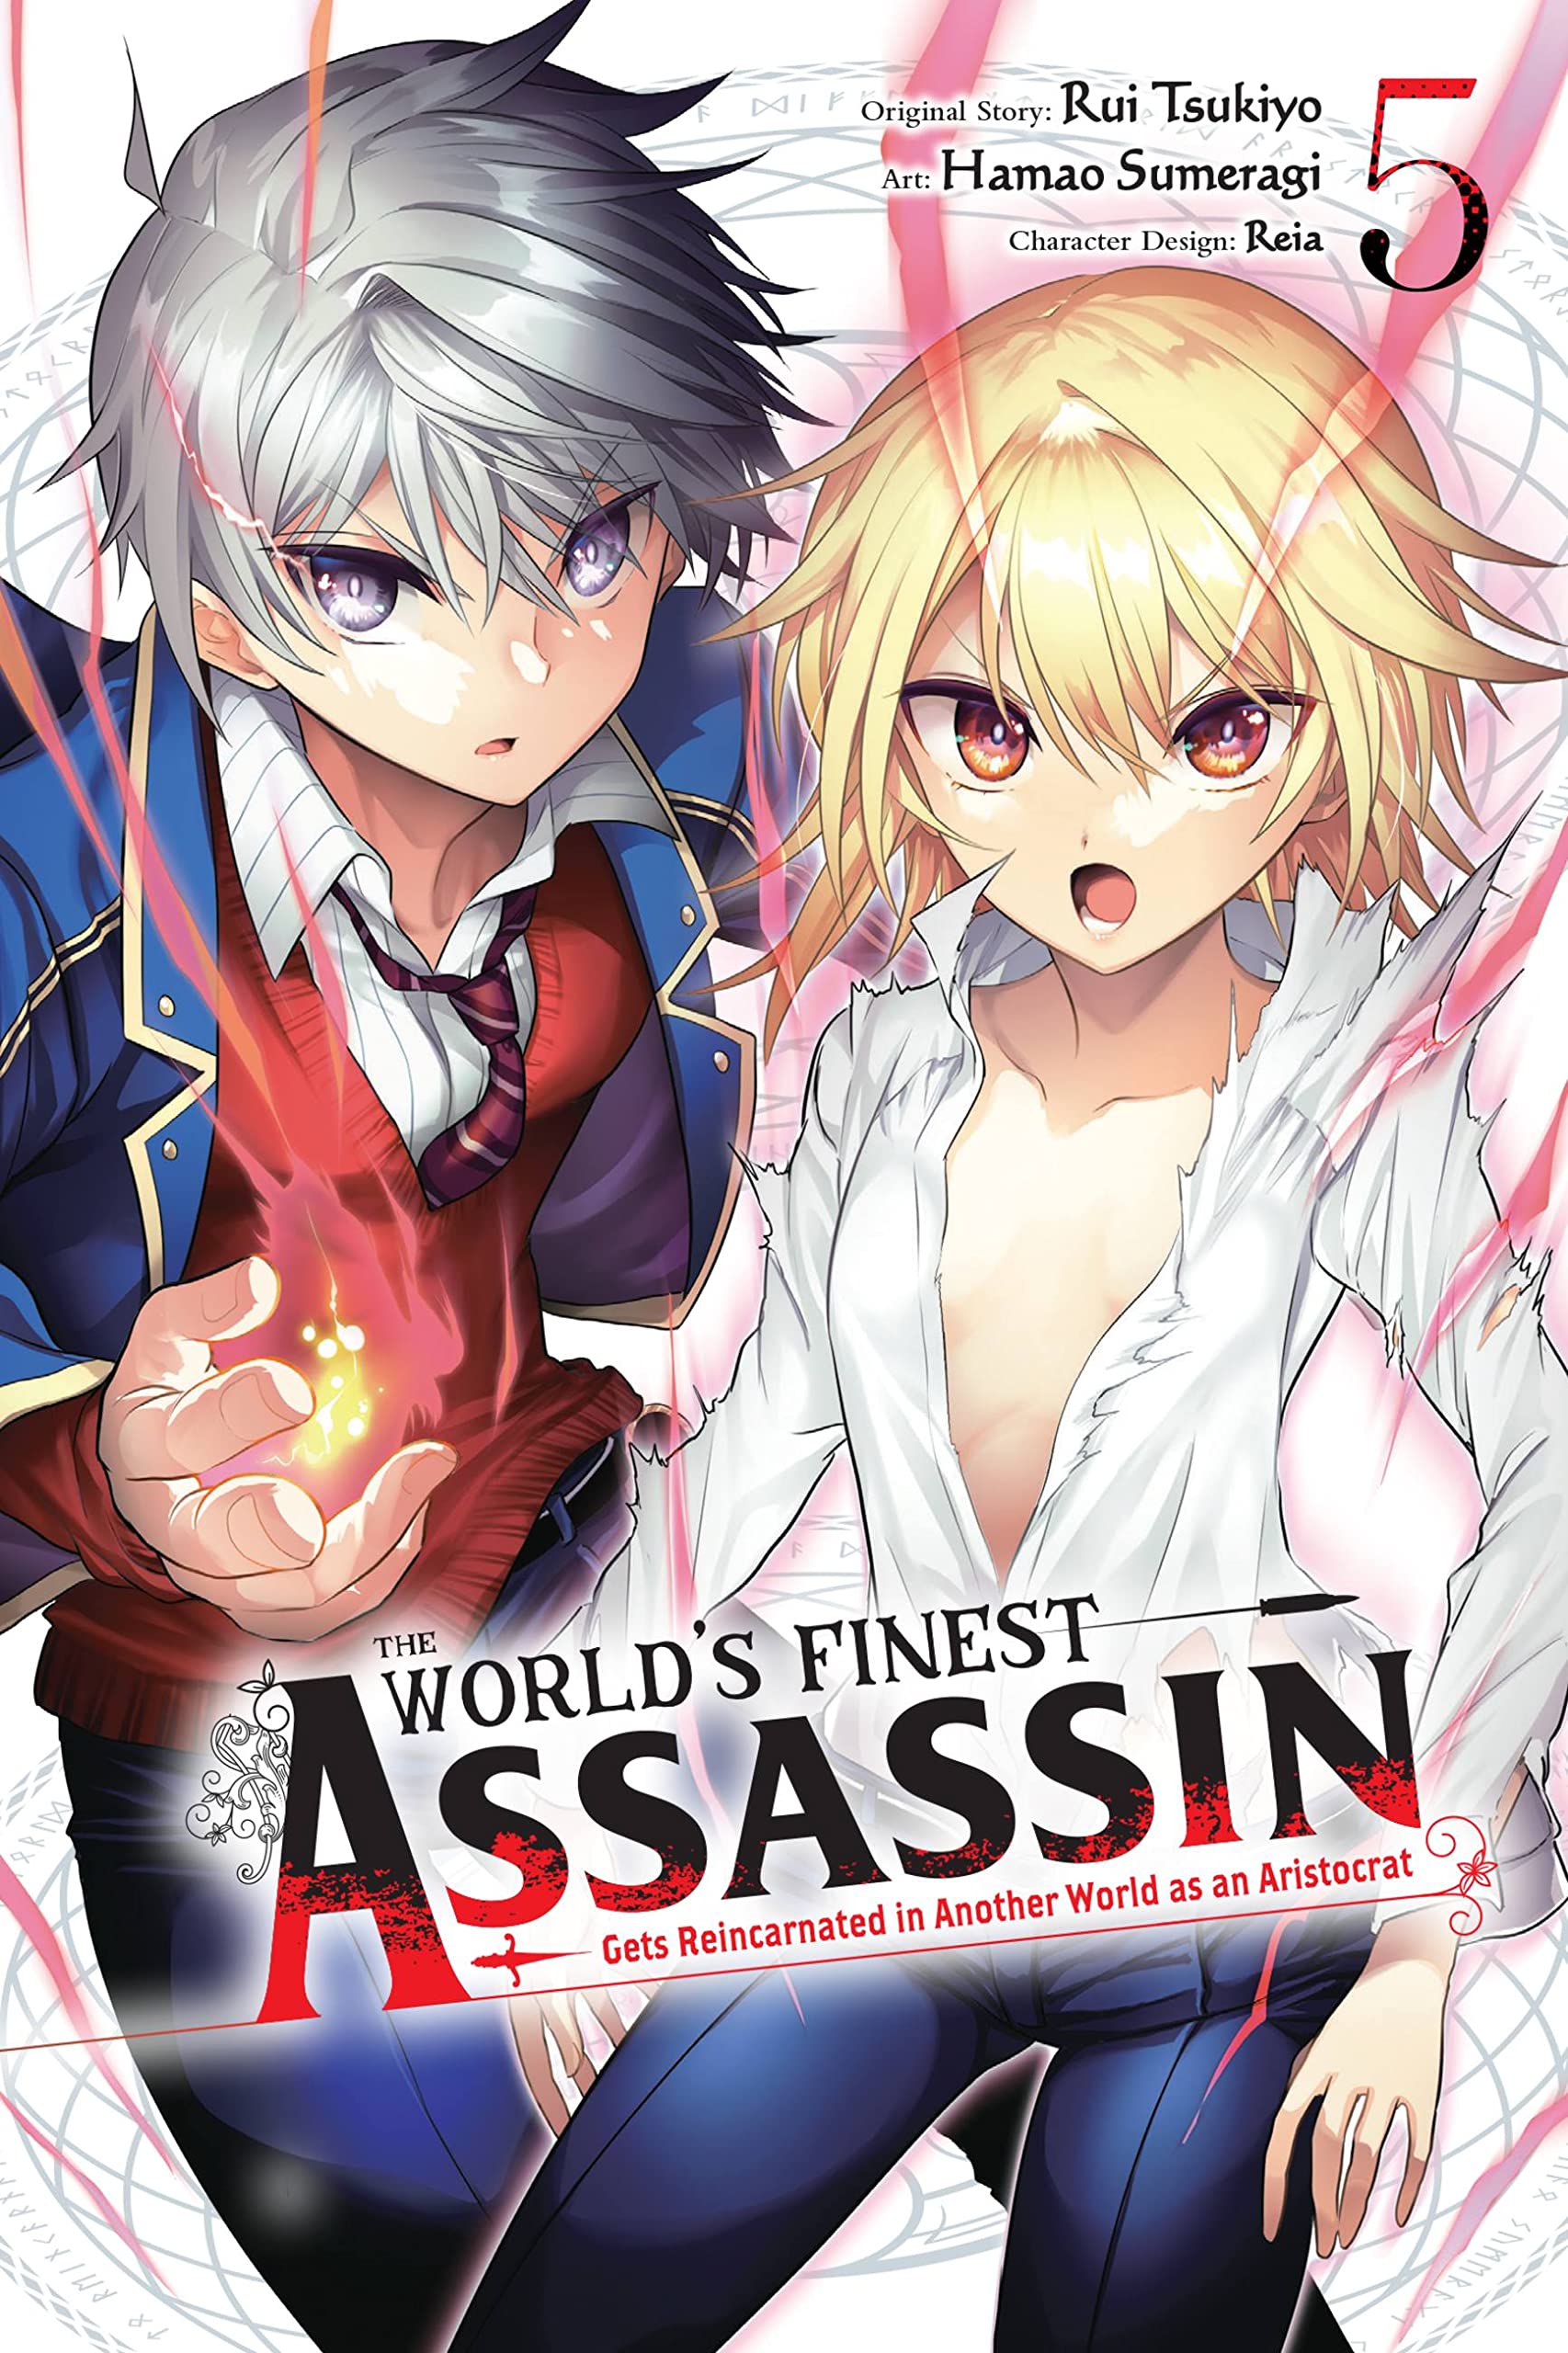 The World's Finest Assassin Gets Reincarnated in Another World as an Aristocrat (Manga) Vol. 05